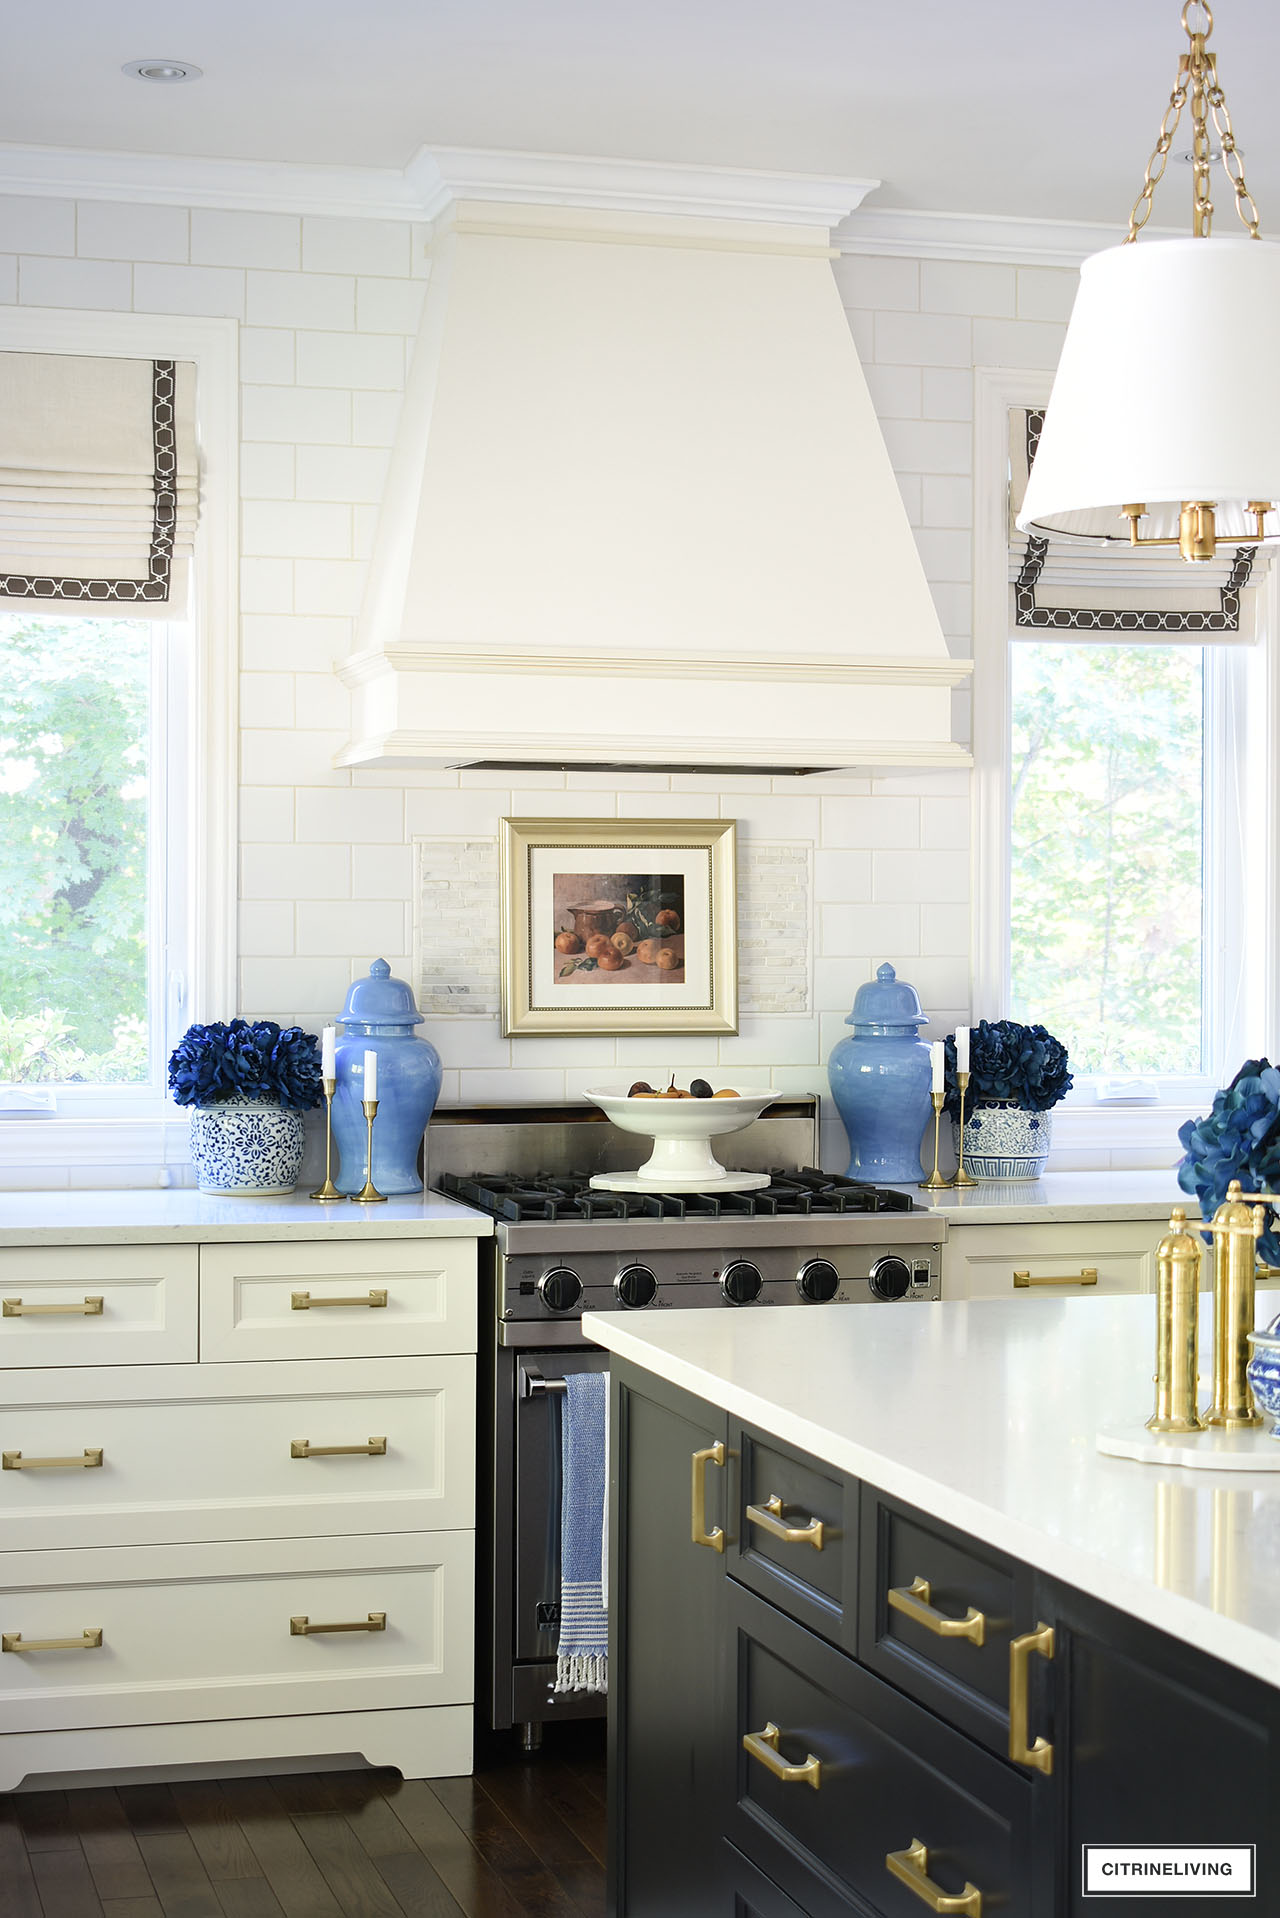 Kitchen stove decorated for fall with vintage art in a gold frame, blue ginger jars and navy blue flowers accented with gold touches is rich and sophisticated.